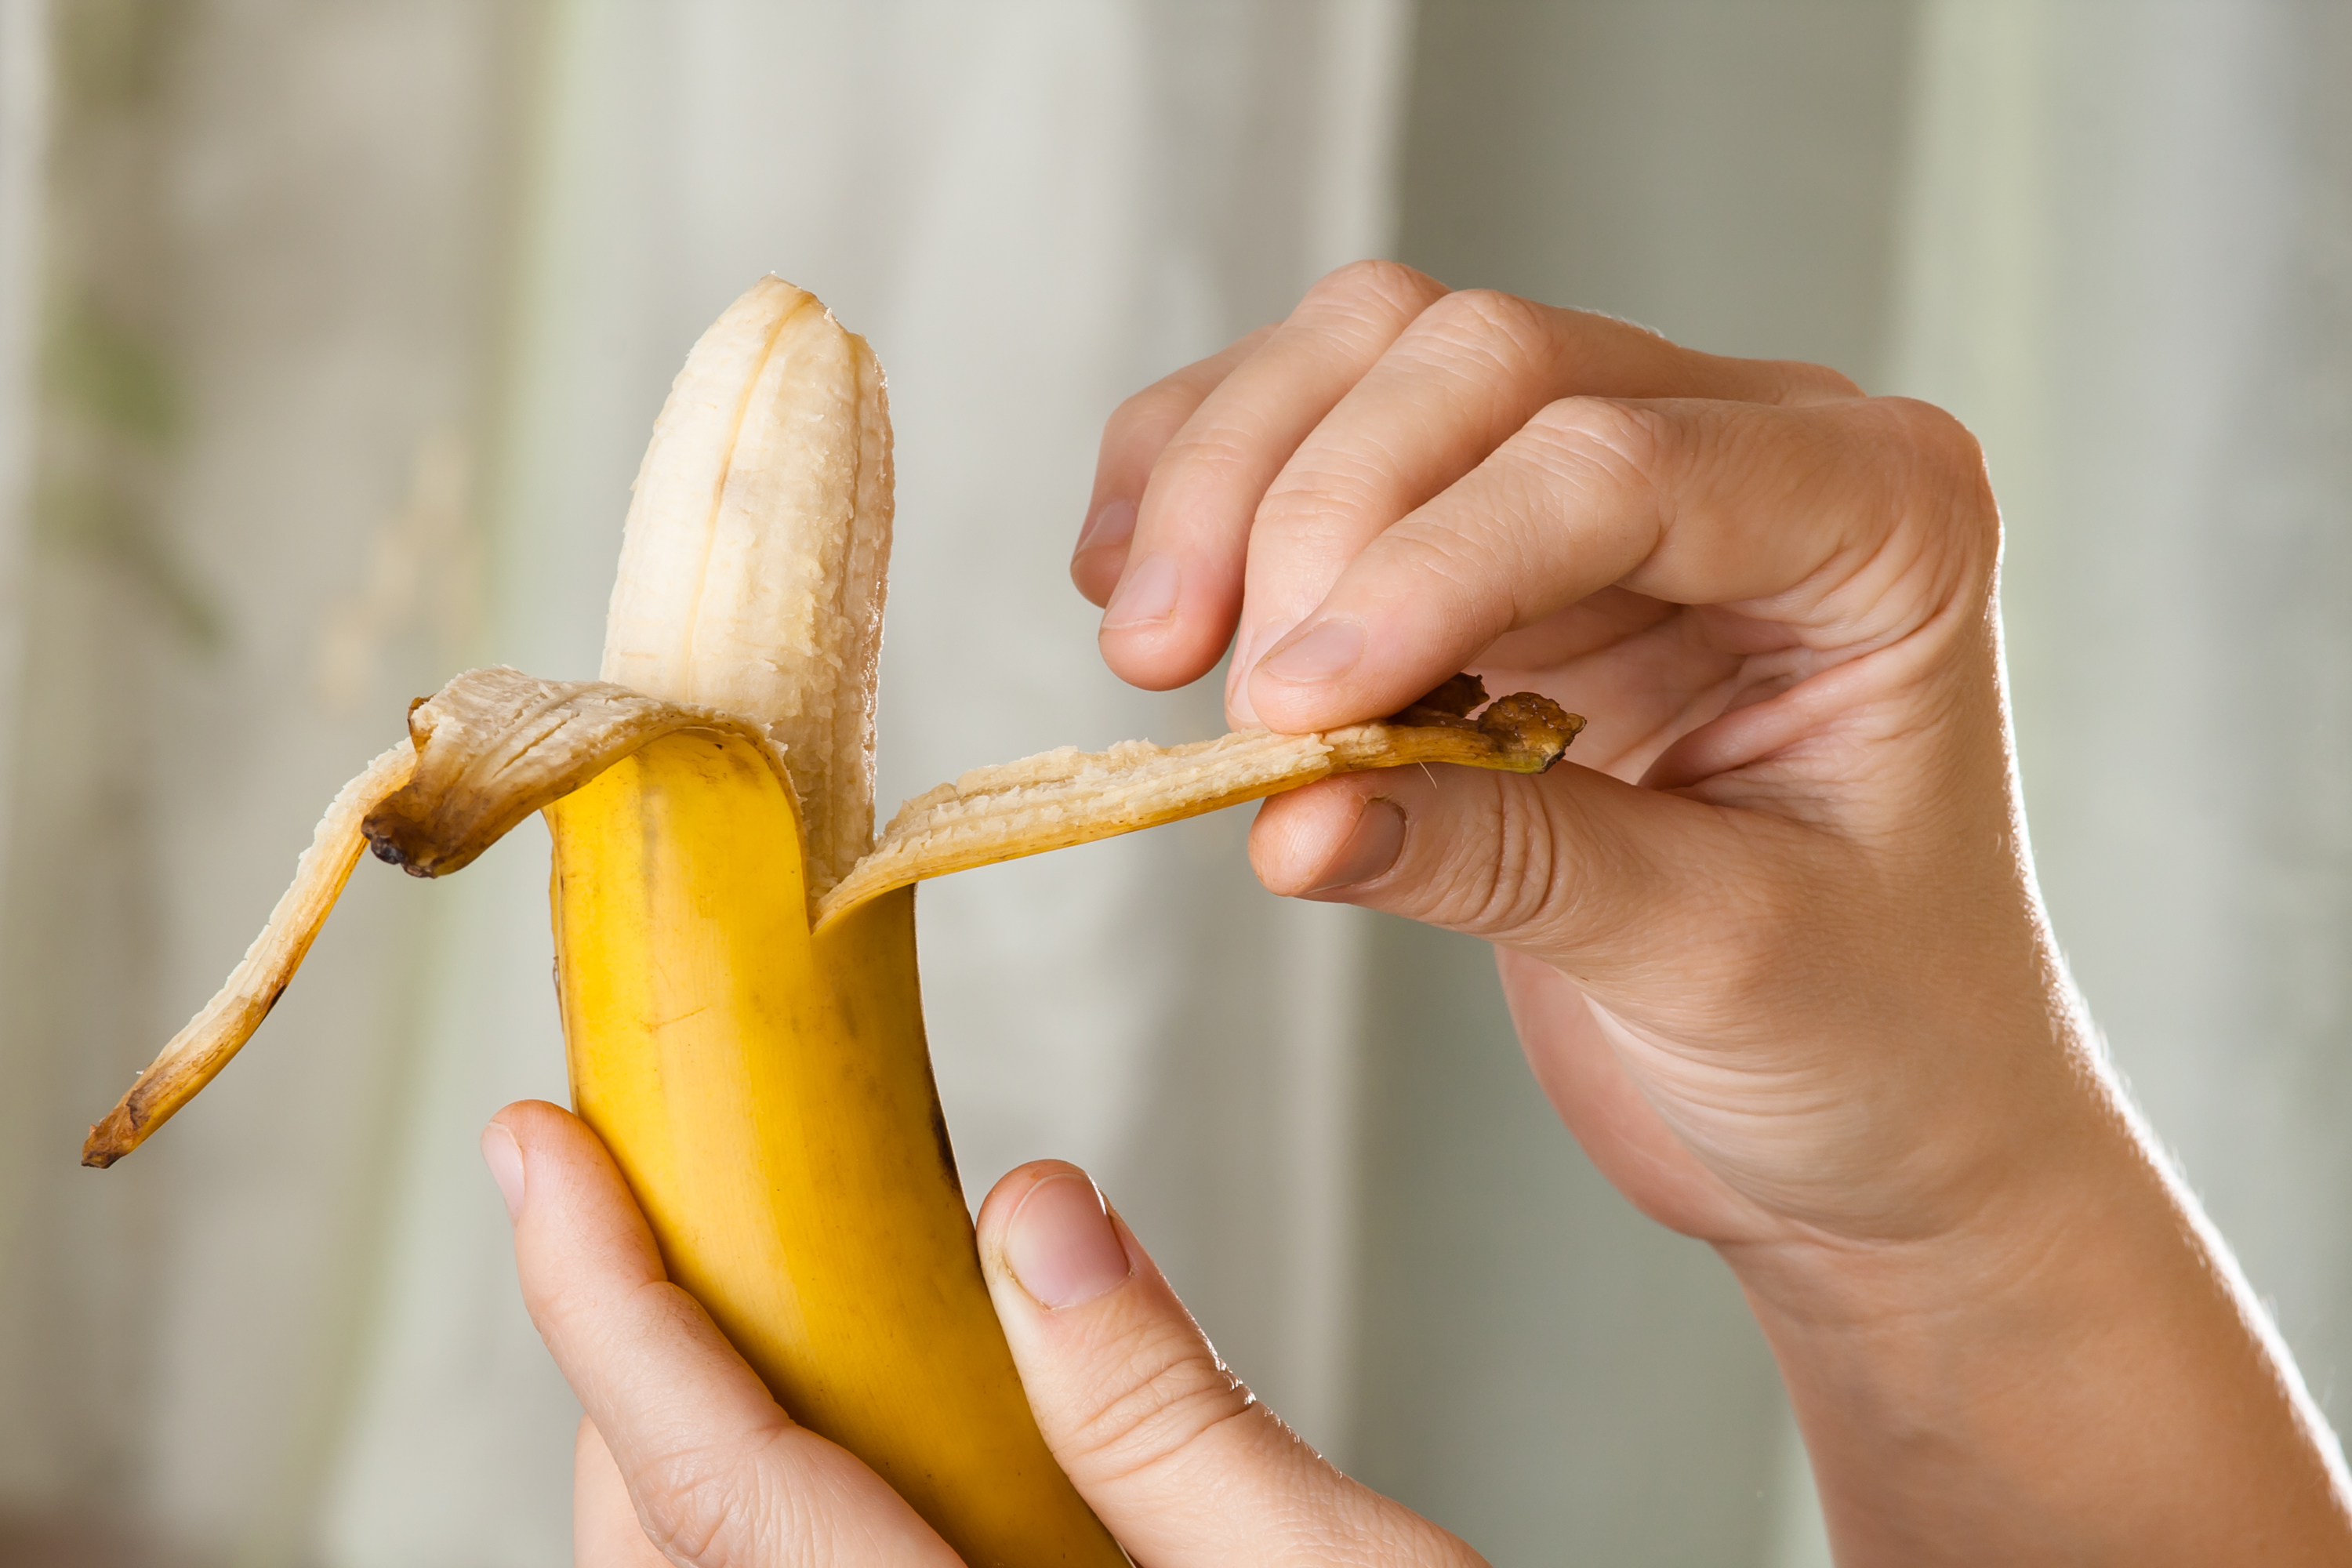 The Way You Eat Common Foods Will Reveal Whether You're… Quiz peeling bananas